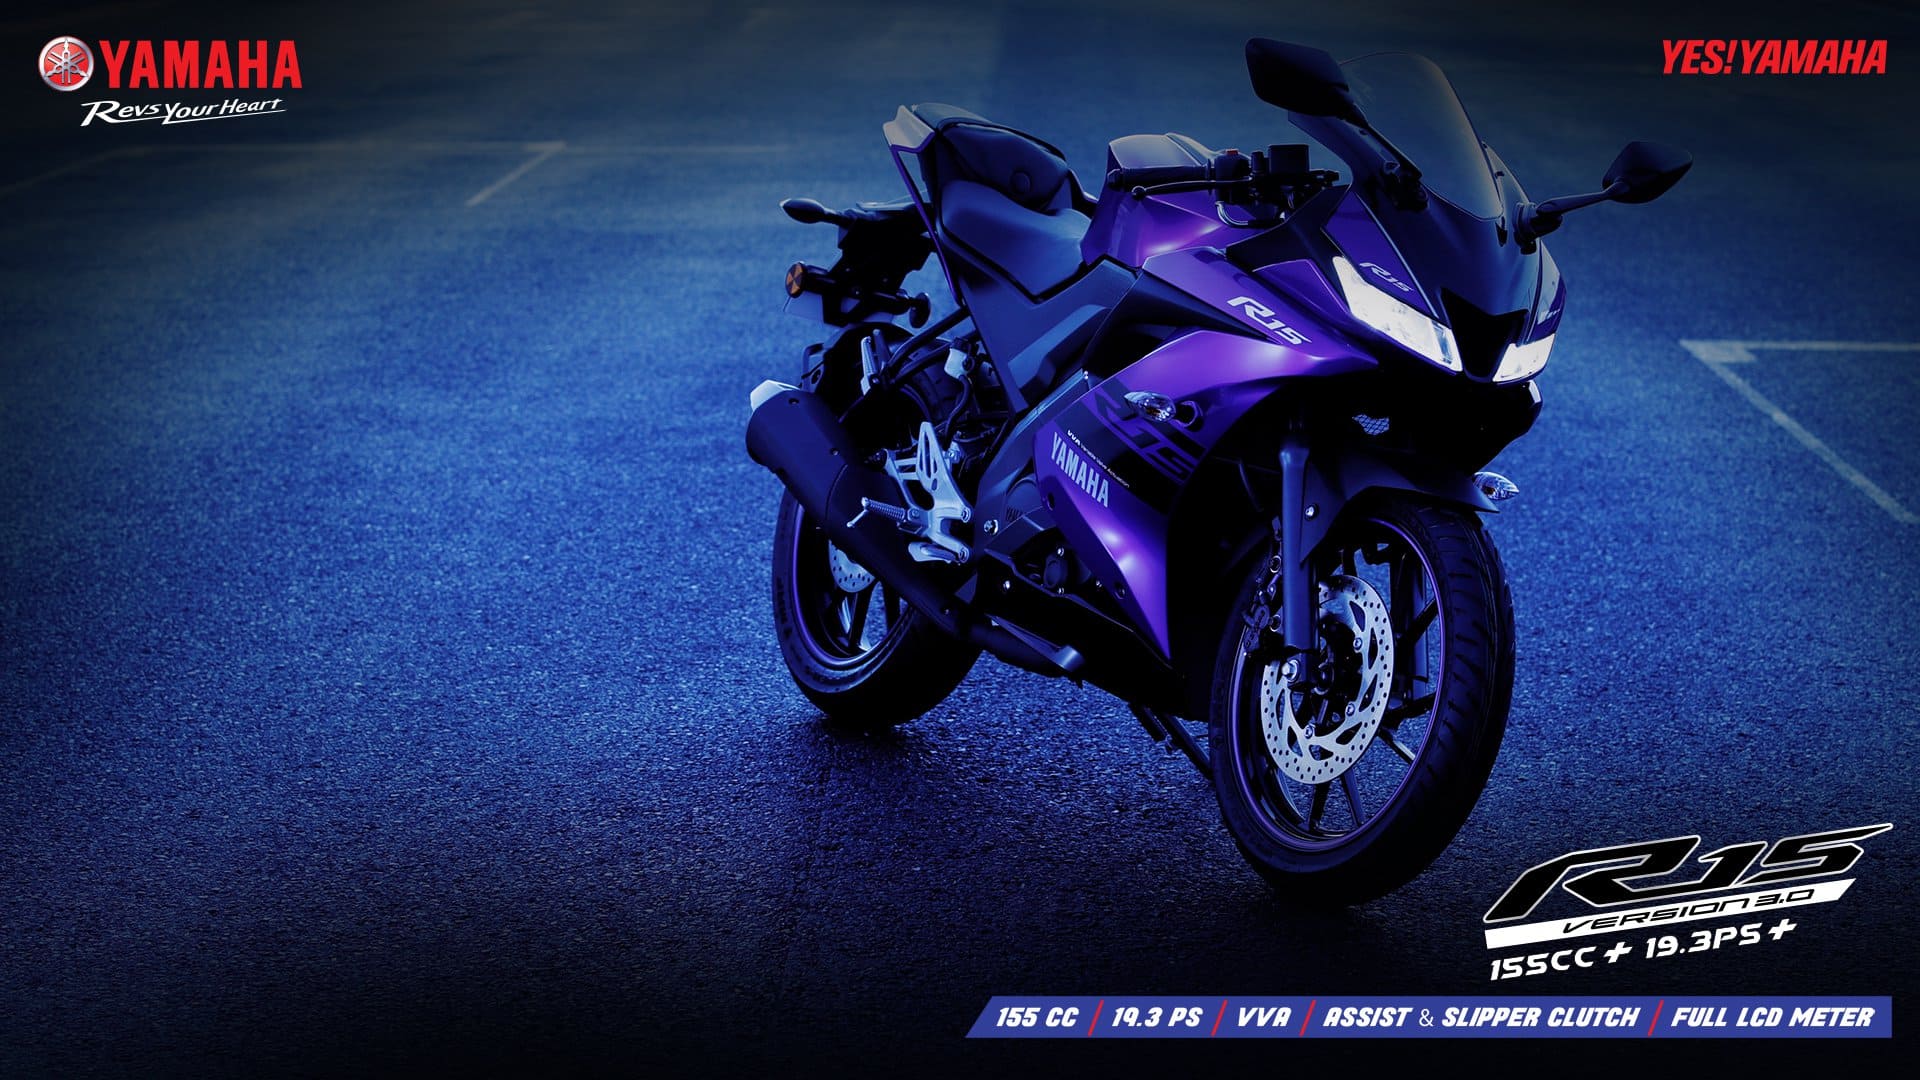 Yamaha R15 V3.0 MotoGP edition launch in August